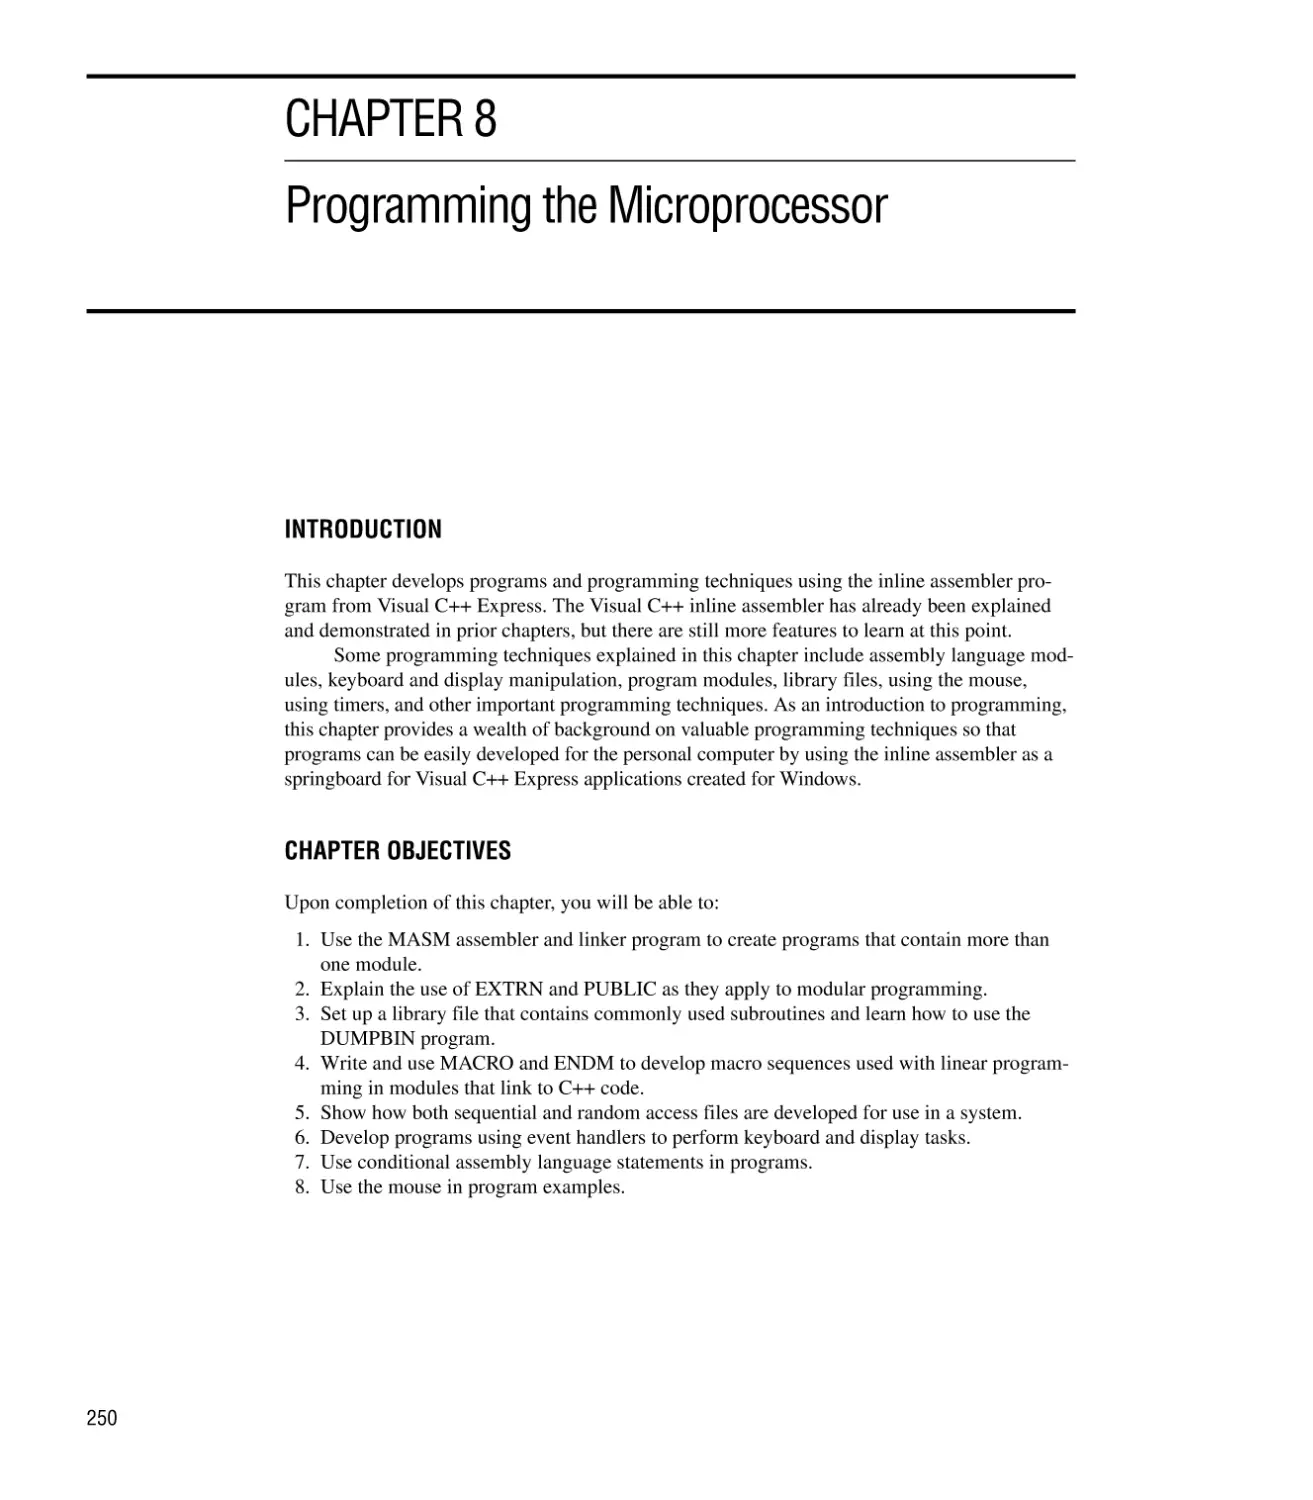 CHAPTER 8 PROGRAMMING THE MICROPROCESSOR
Introduction/Chapter Objectives